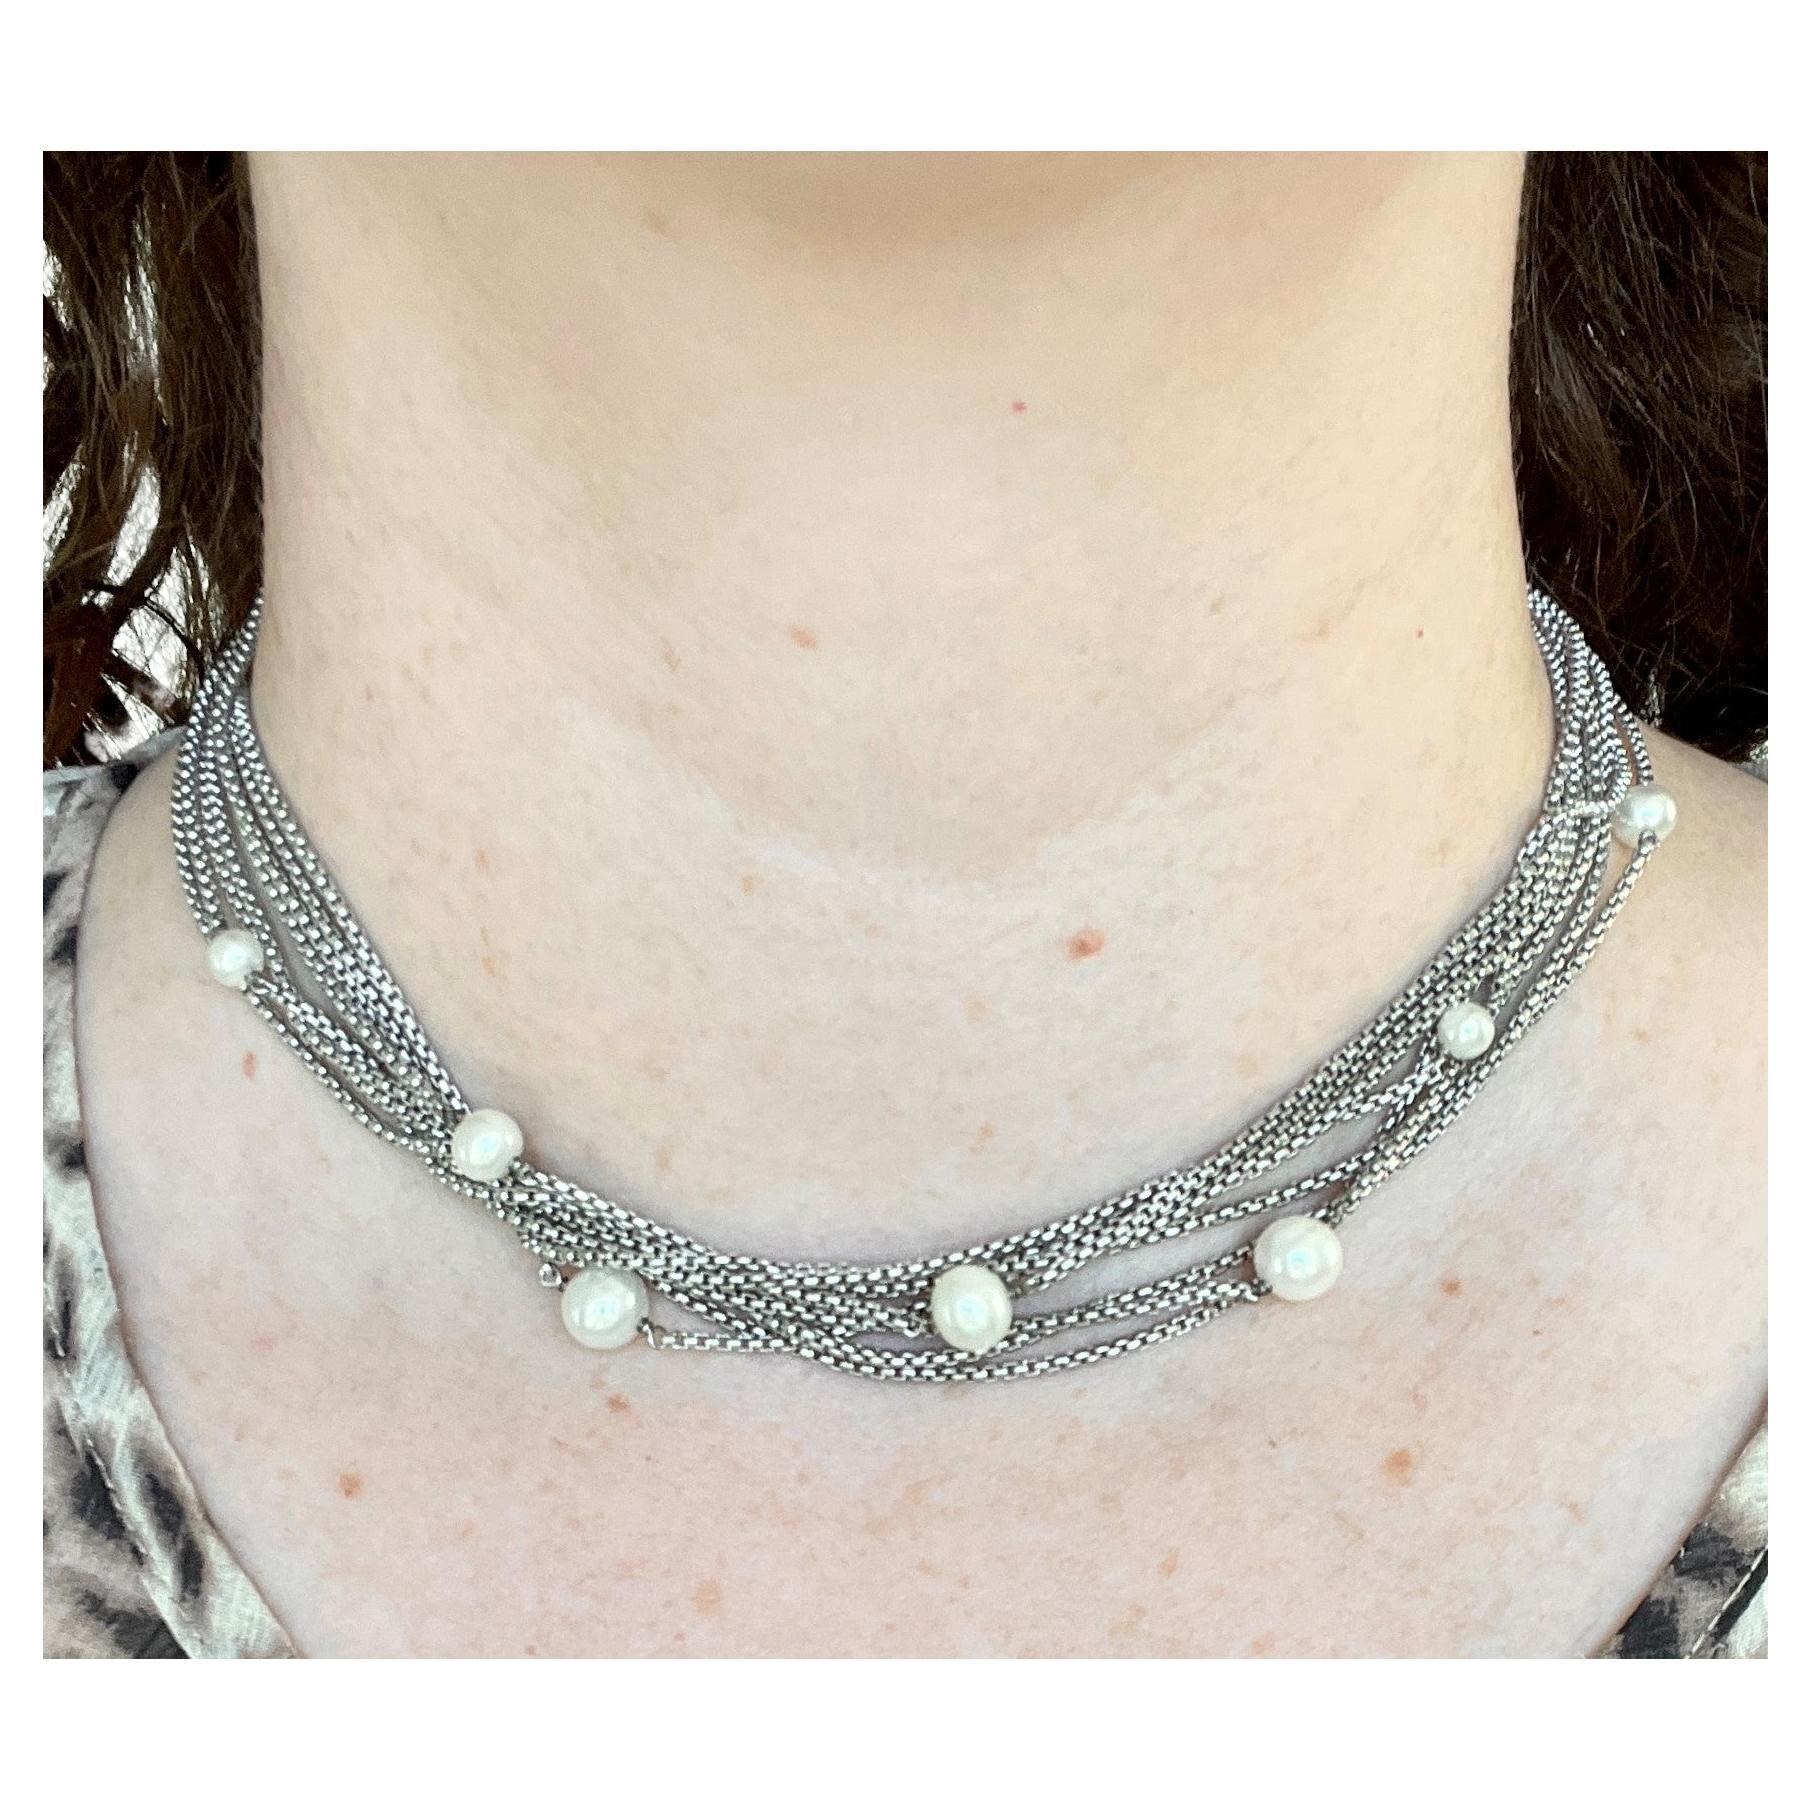 Classically David Yurman, this multi-strand sterling necklace is accented throughout with cultured pearls ranging from 5mm-8mm. . The strands are intentionally tangled for a fresh, contemporary look, and it is finished with a high-quality, secure